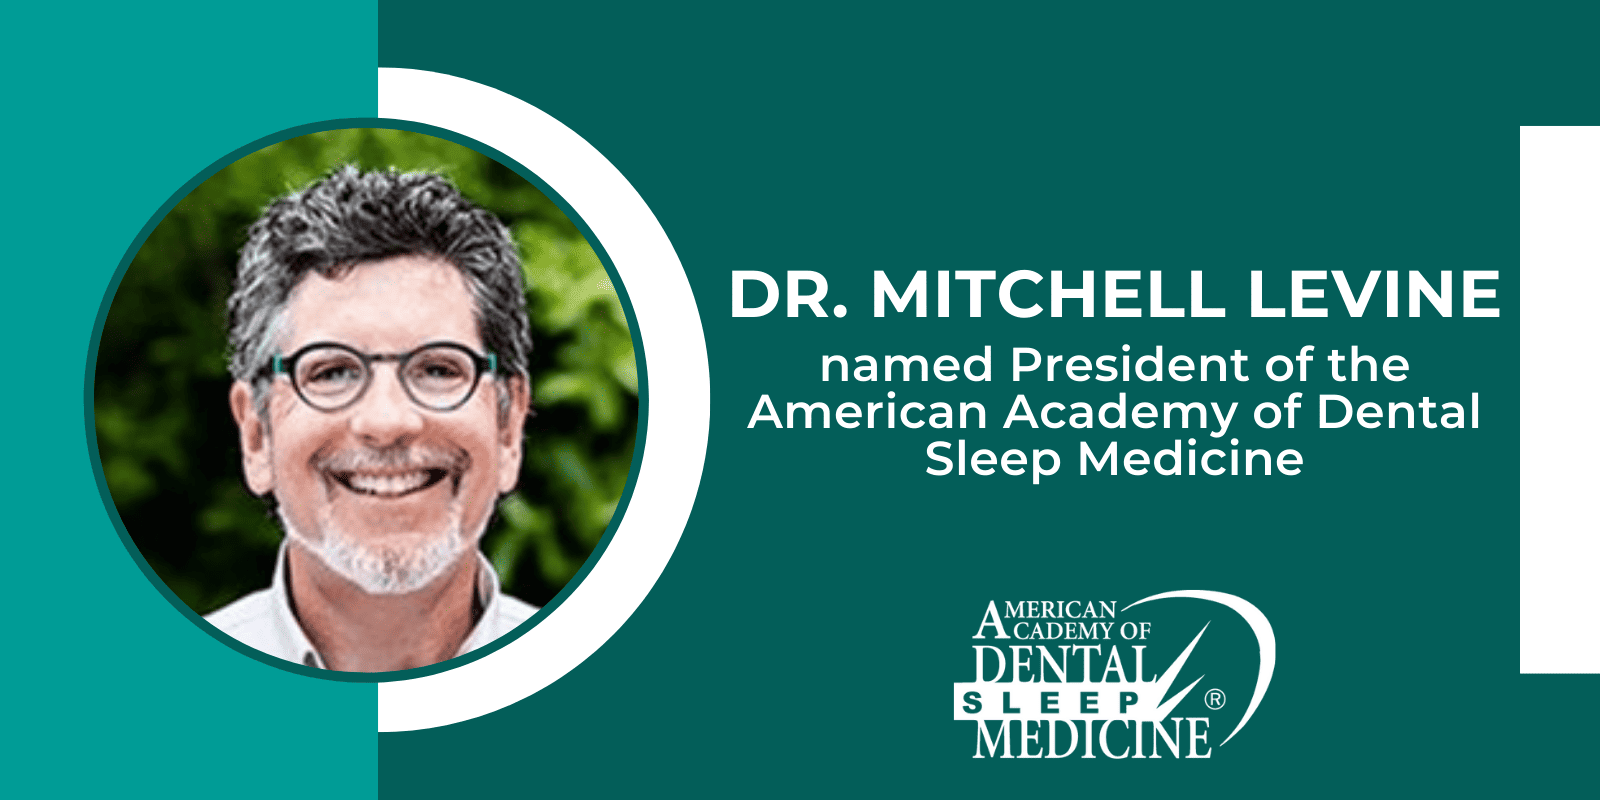 Dr. Mitchell Levine Named President of the AADSM Dental Sleep